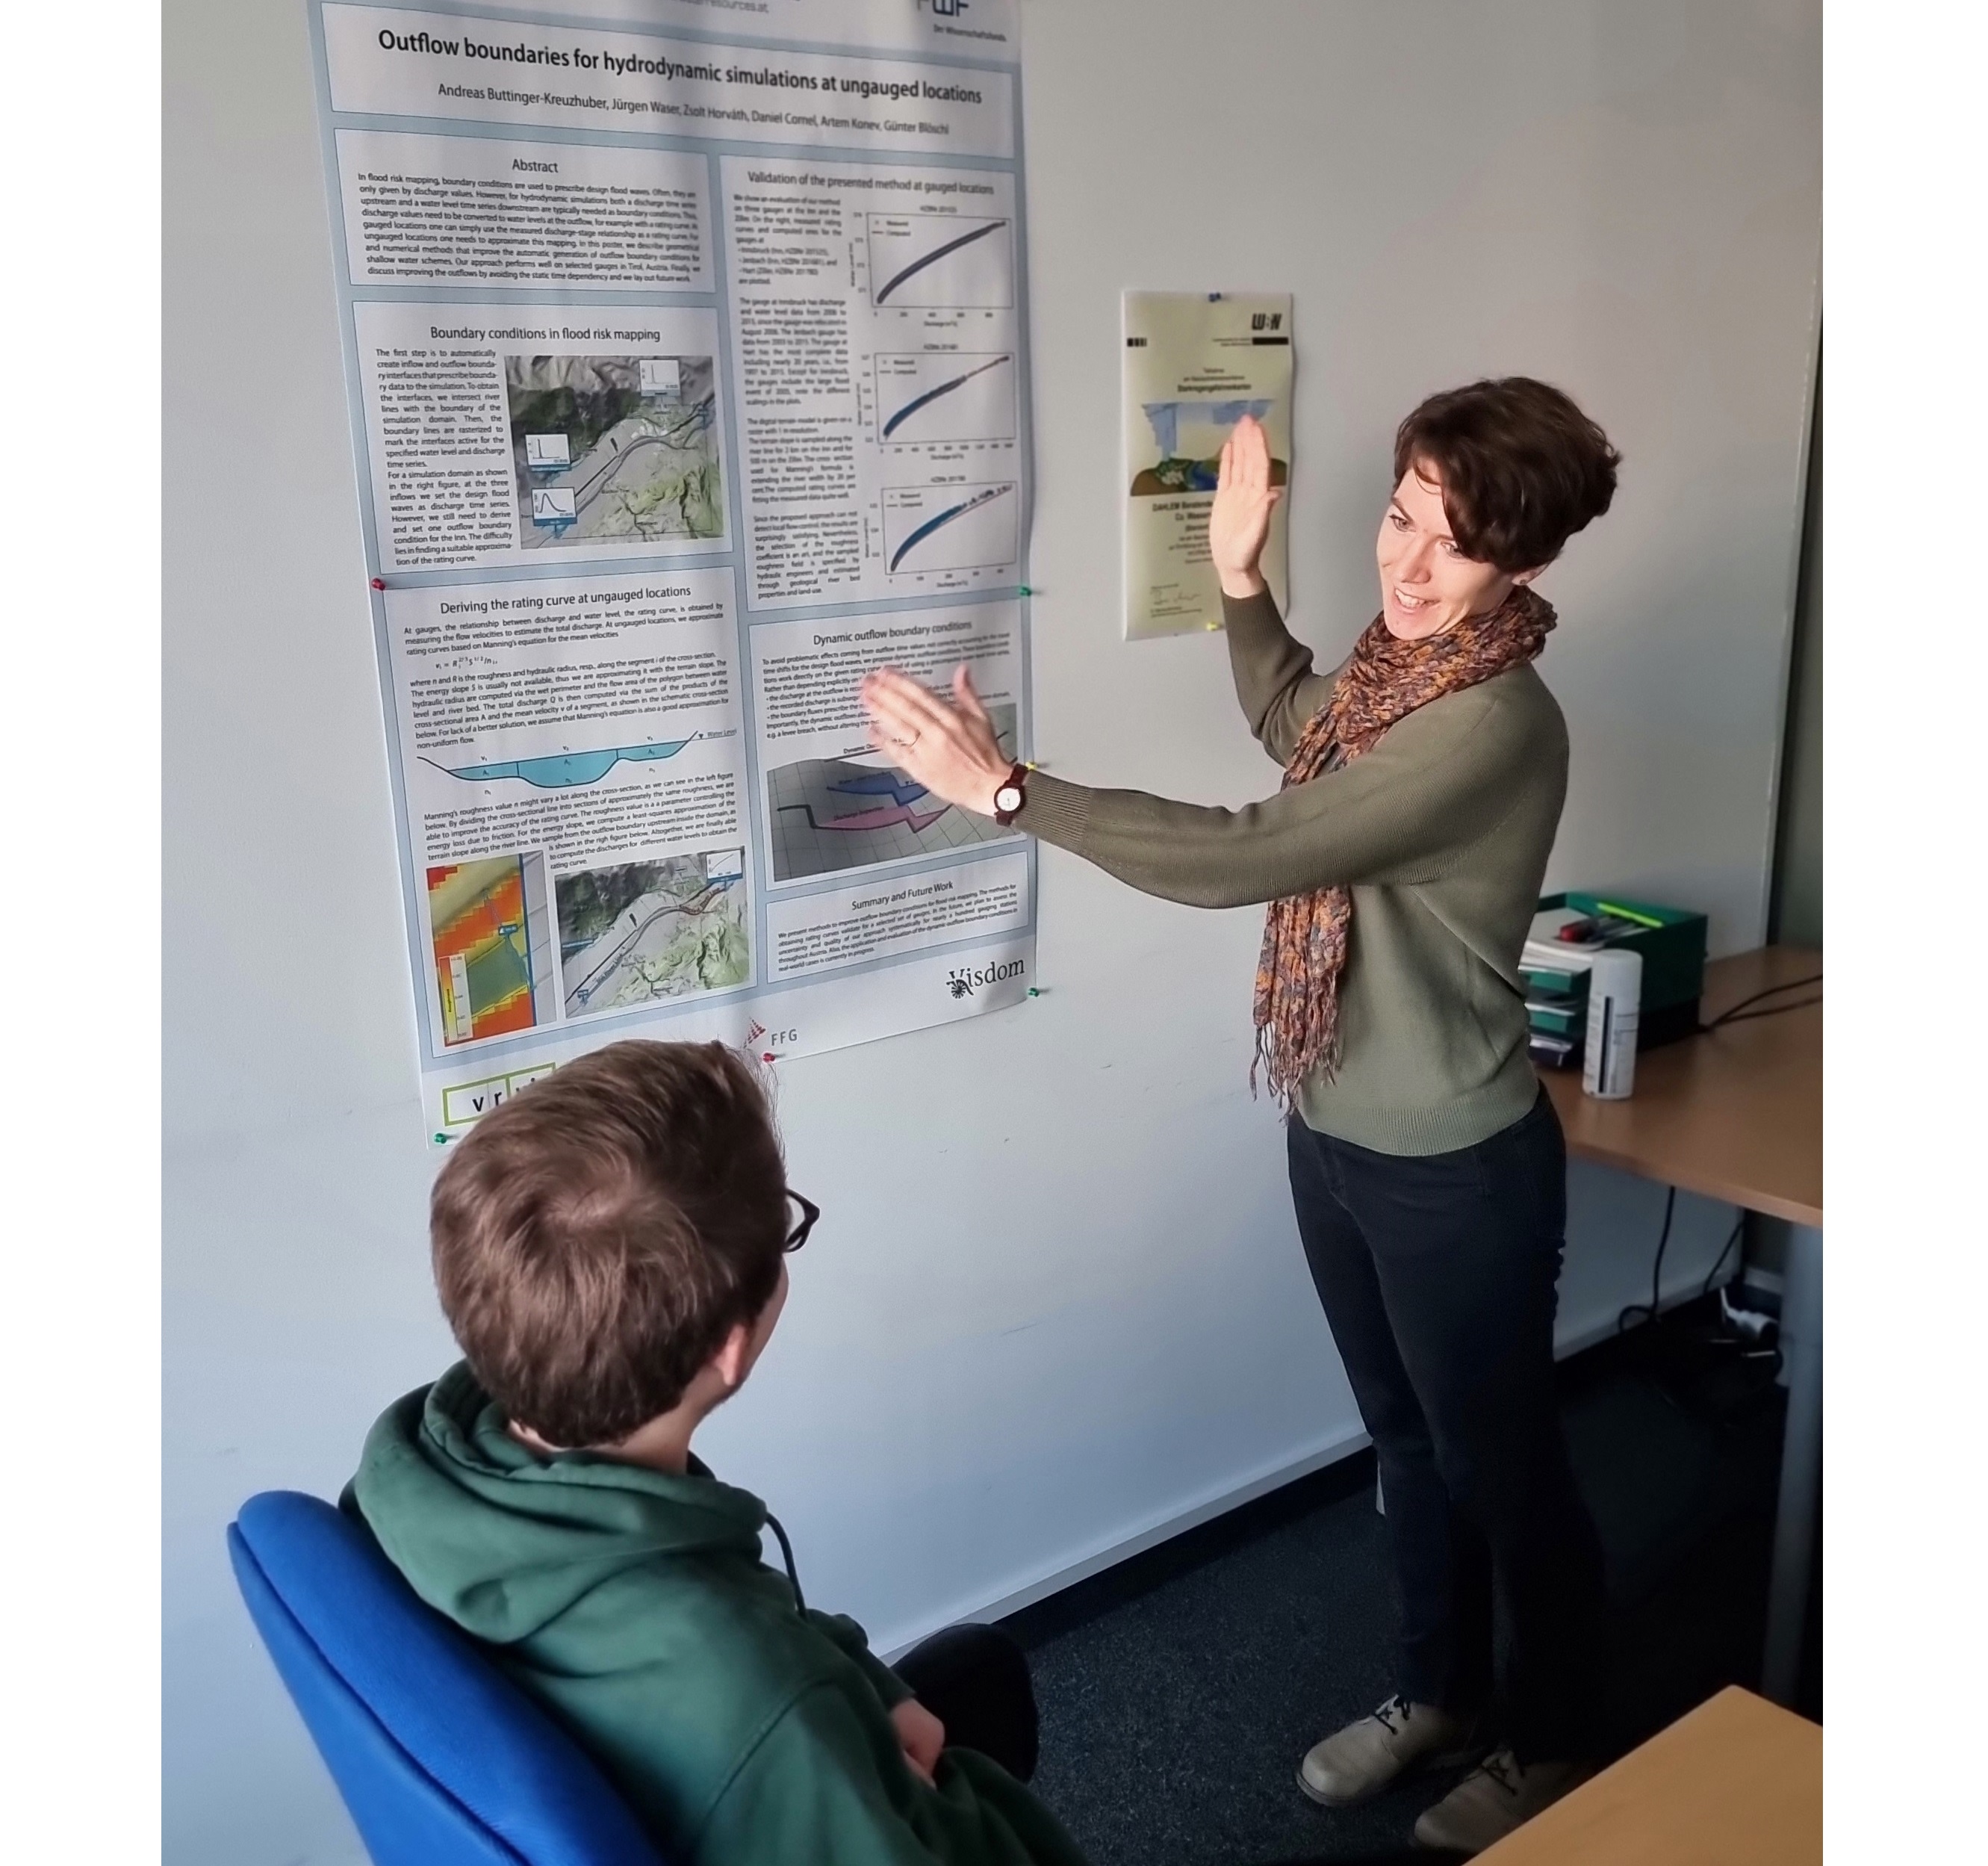 A researcher is standing in front of a scientific poster explaining something to a fellow researcher.